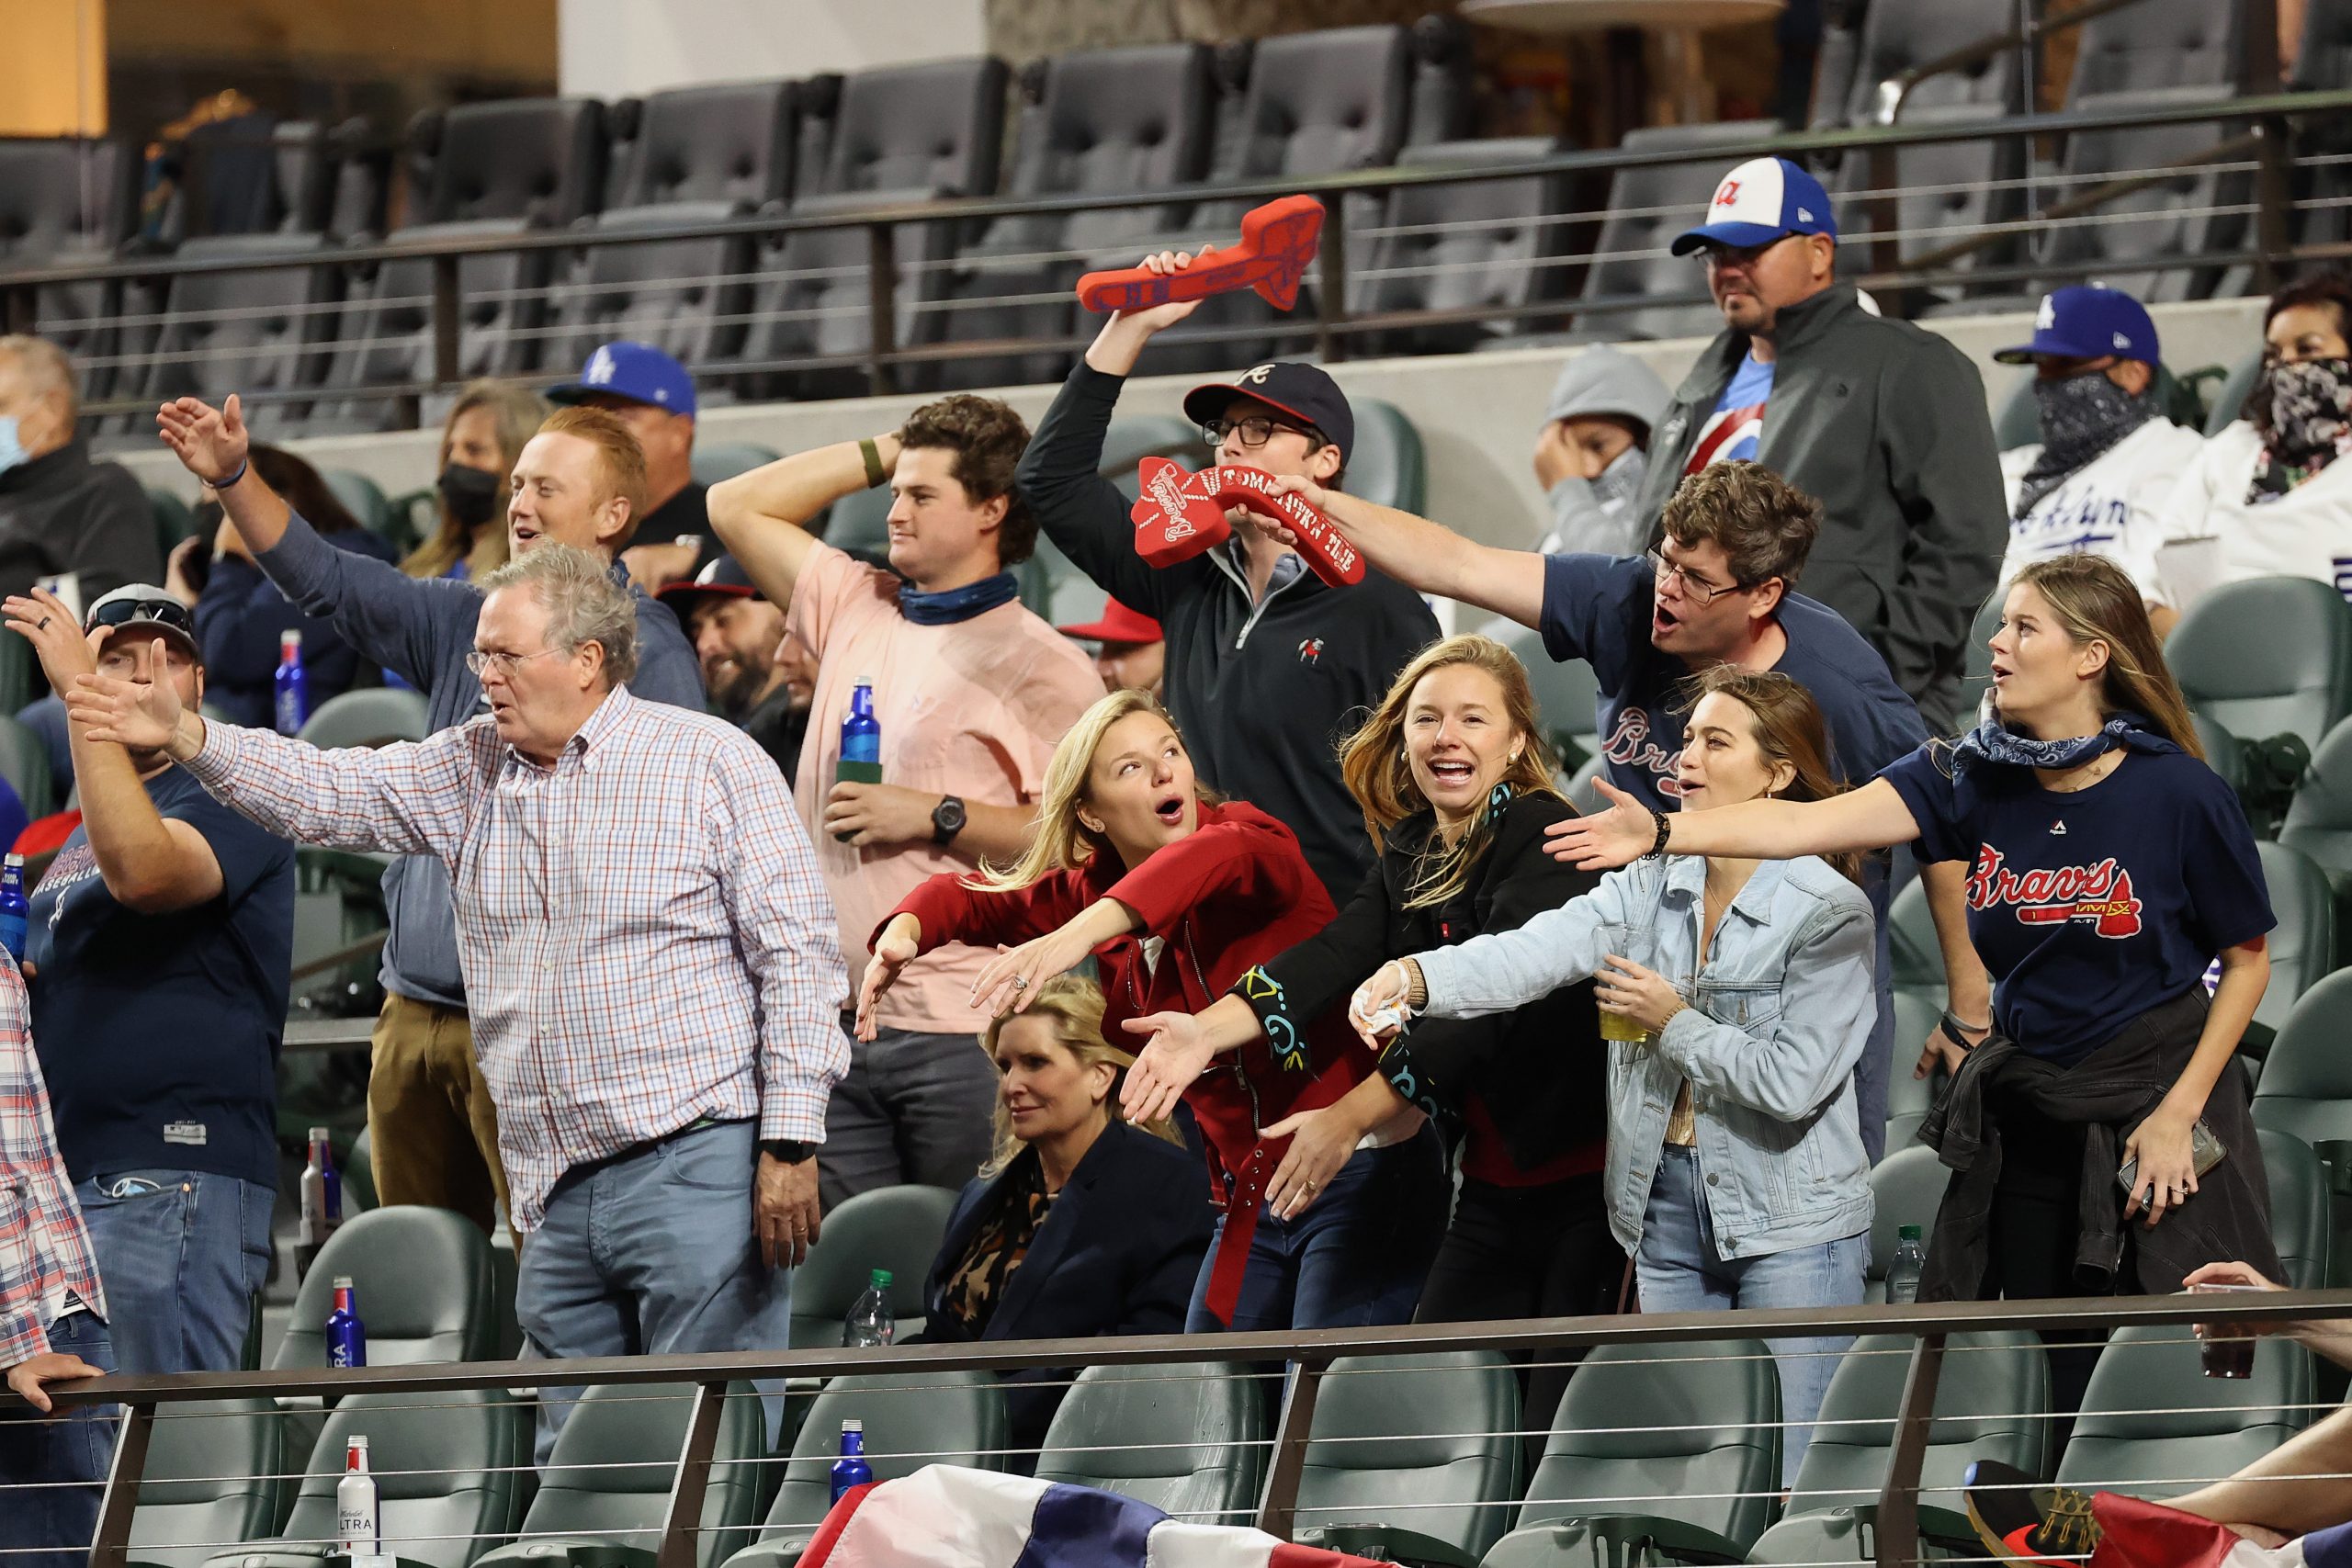 World Series: Tomahawk chop is racist, but Braves, MLB support it